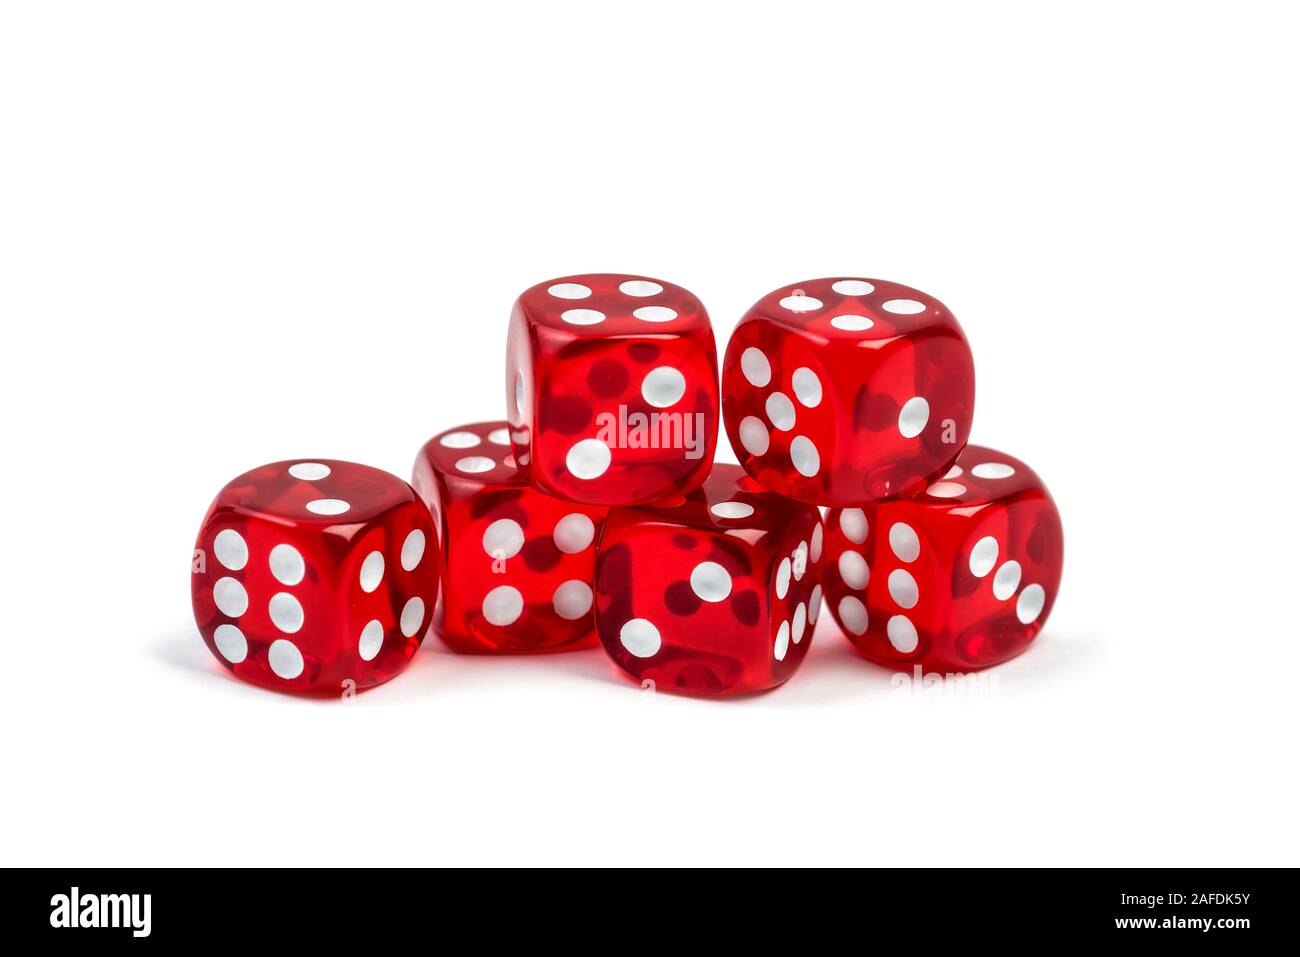 Group of red gambling casino dice isolated on white background Stock Photo